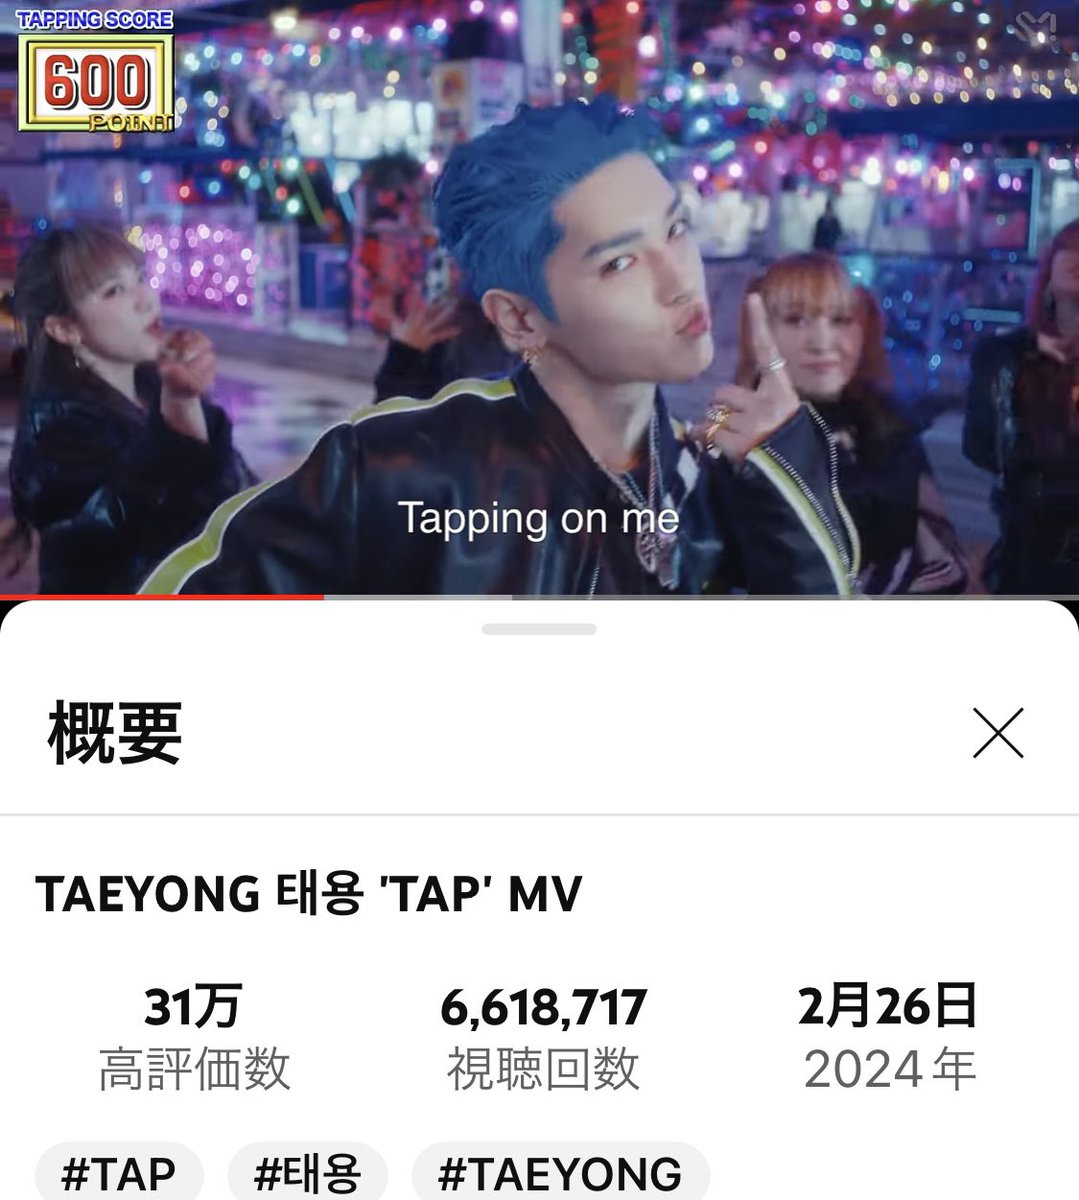 @tychi07011215 @mayontaeyong 朝起きたらまず 🍡おはよう☀️のMV 1TAP🍡 #あつまれてょんぷの森 #AlwaysWithTaeyong #TAEYONG_TAP youtu.be/vjGIY_GyAz4?si…